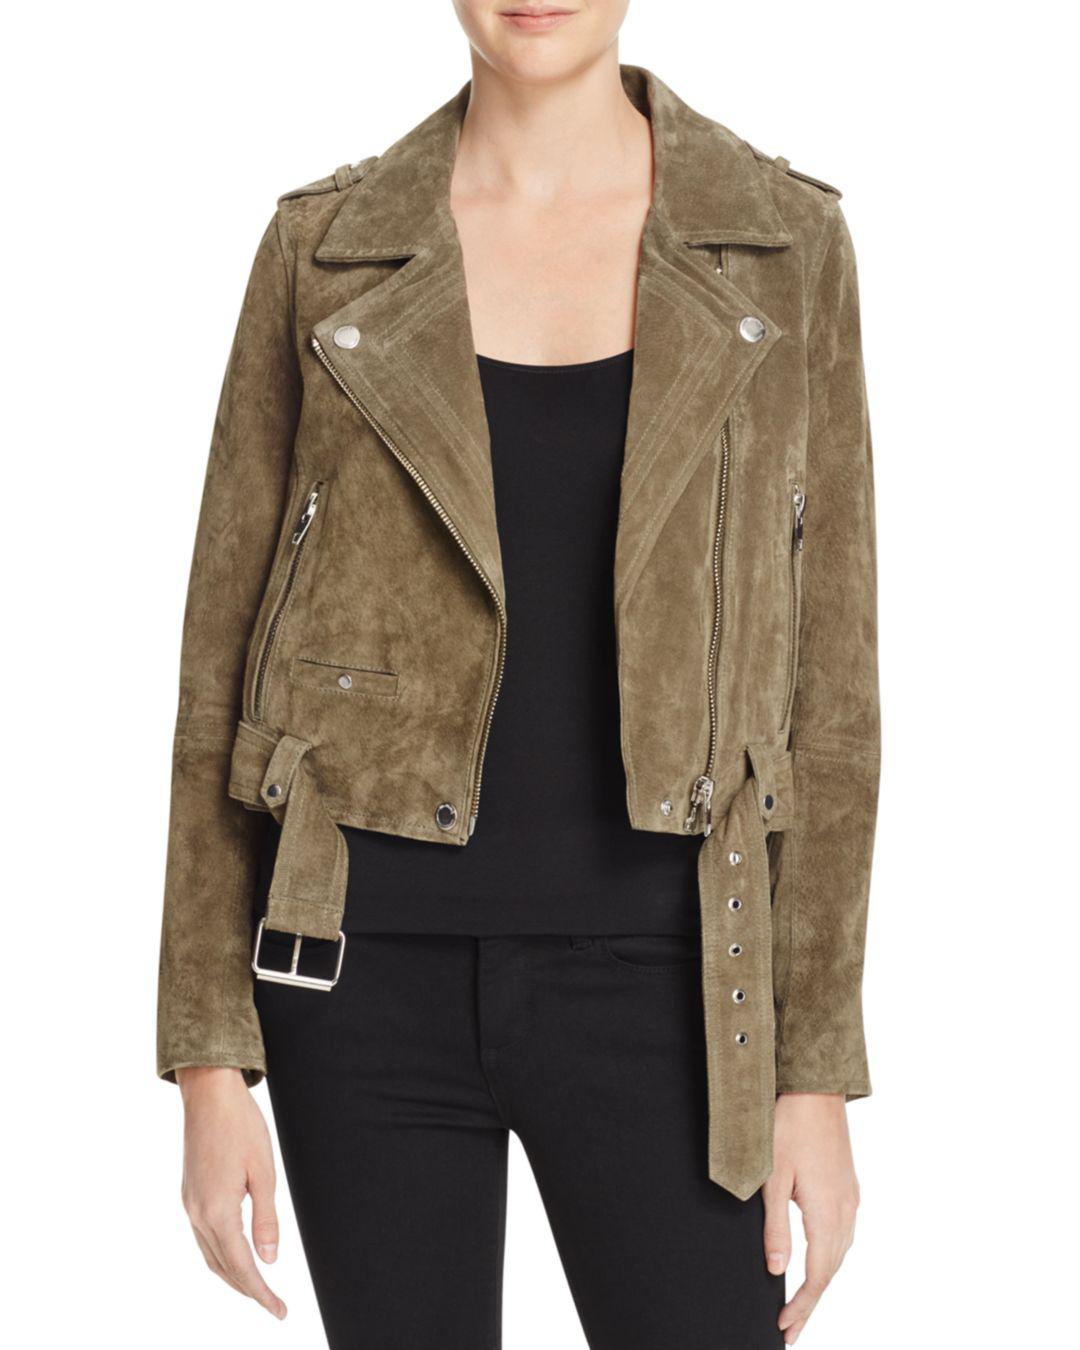 Blank NYC Suede Moto Jacket in Olive Green (Green) Lyst